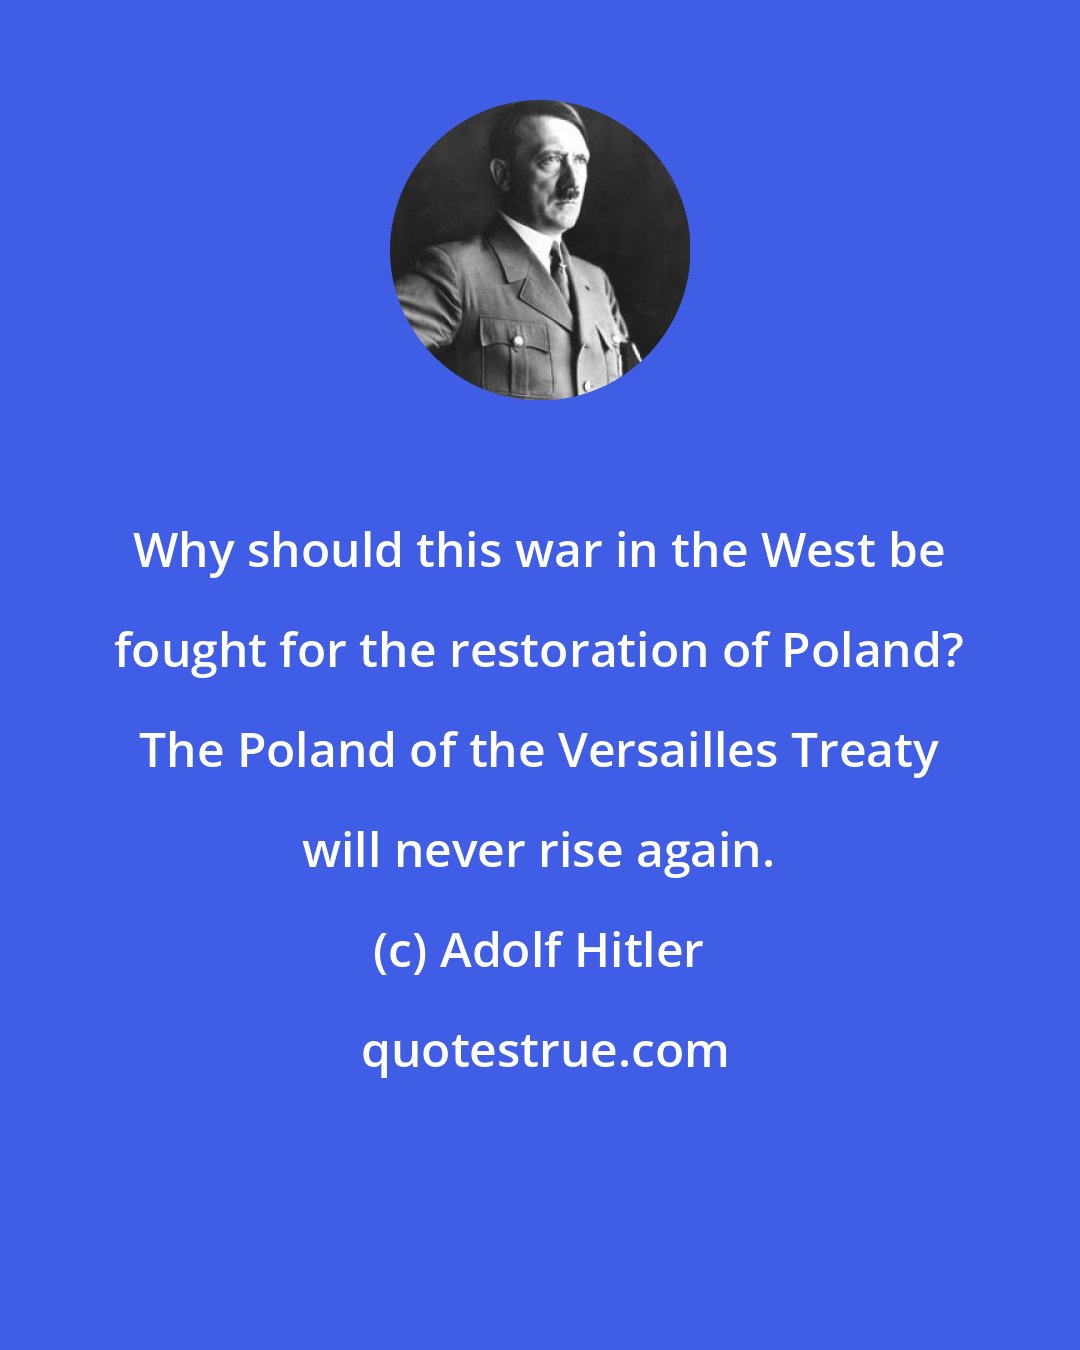 Adolf Hitler: Why should this war in the West be fought for the restoration of Poland? The Poland of the Versailles Treaty will never rise again.